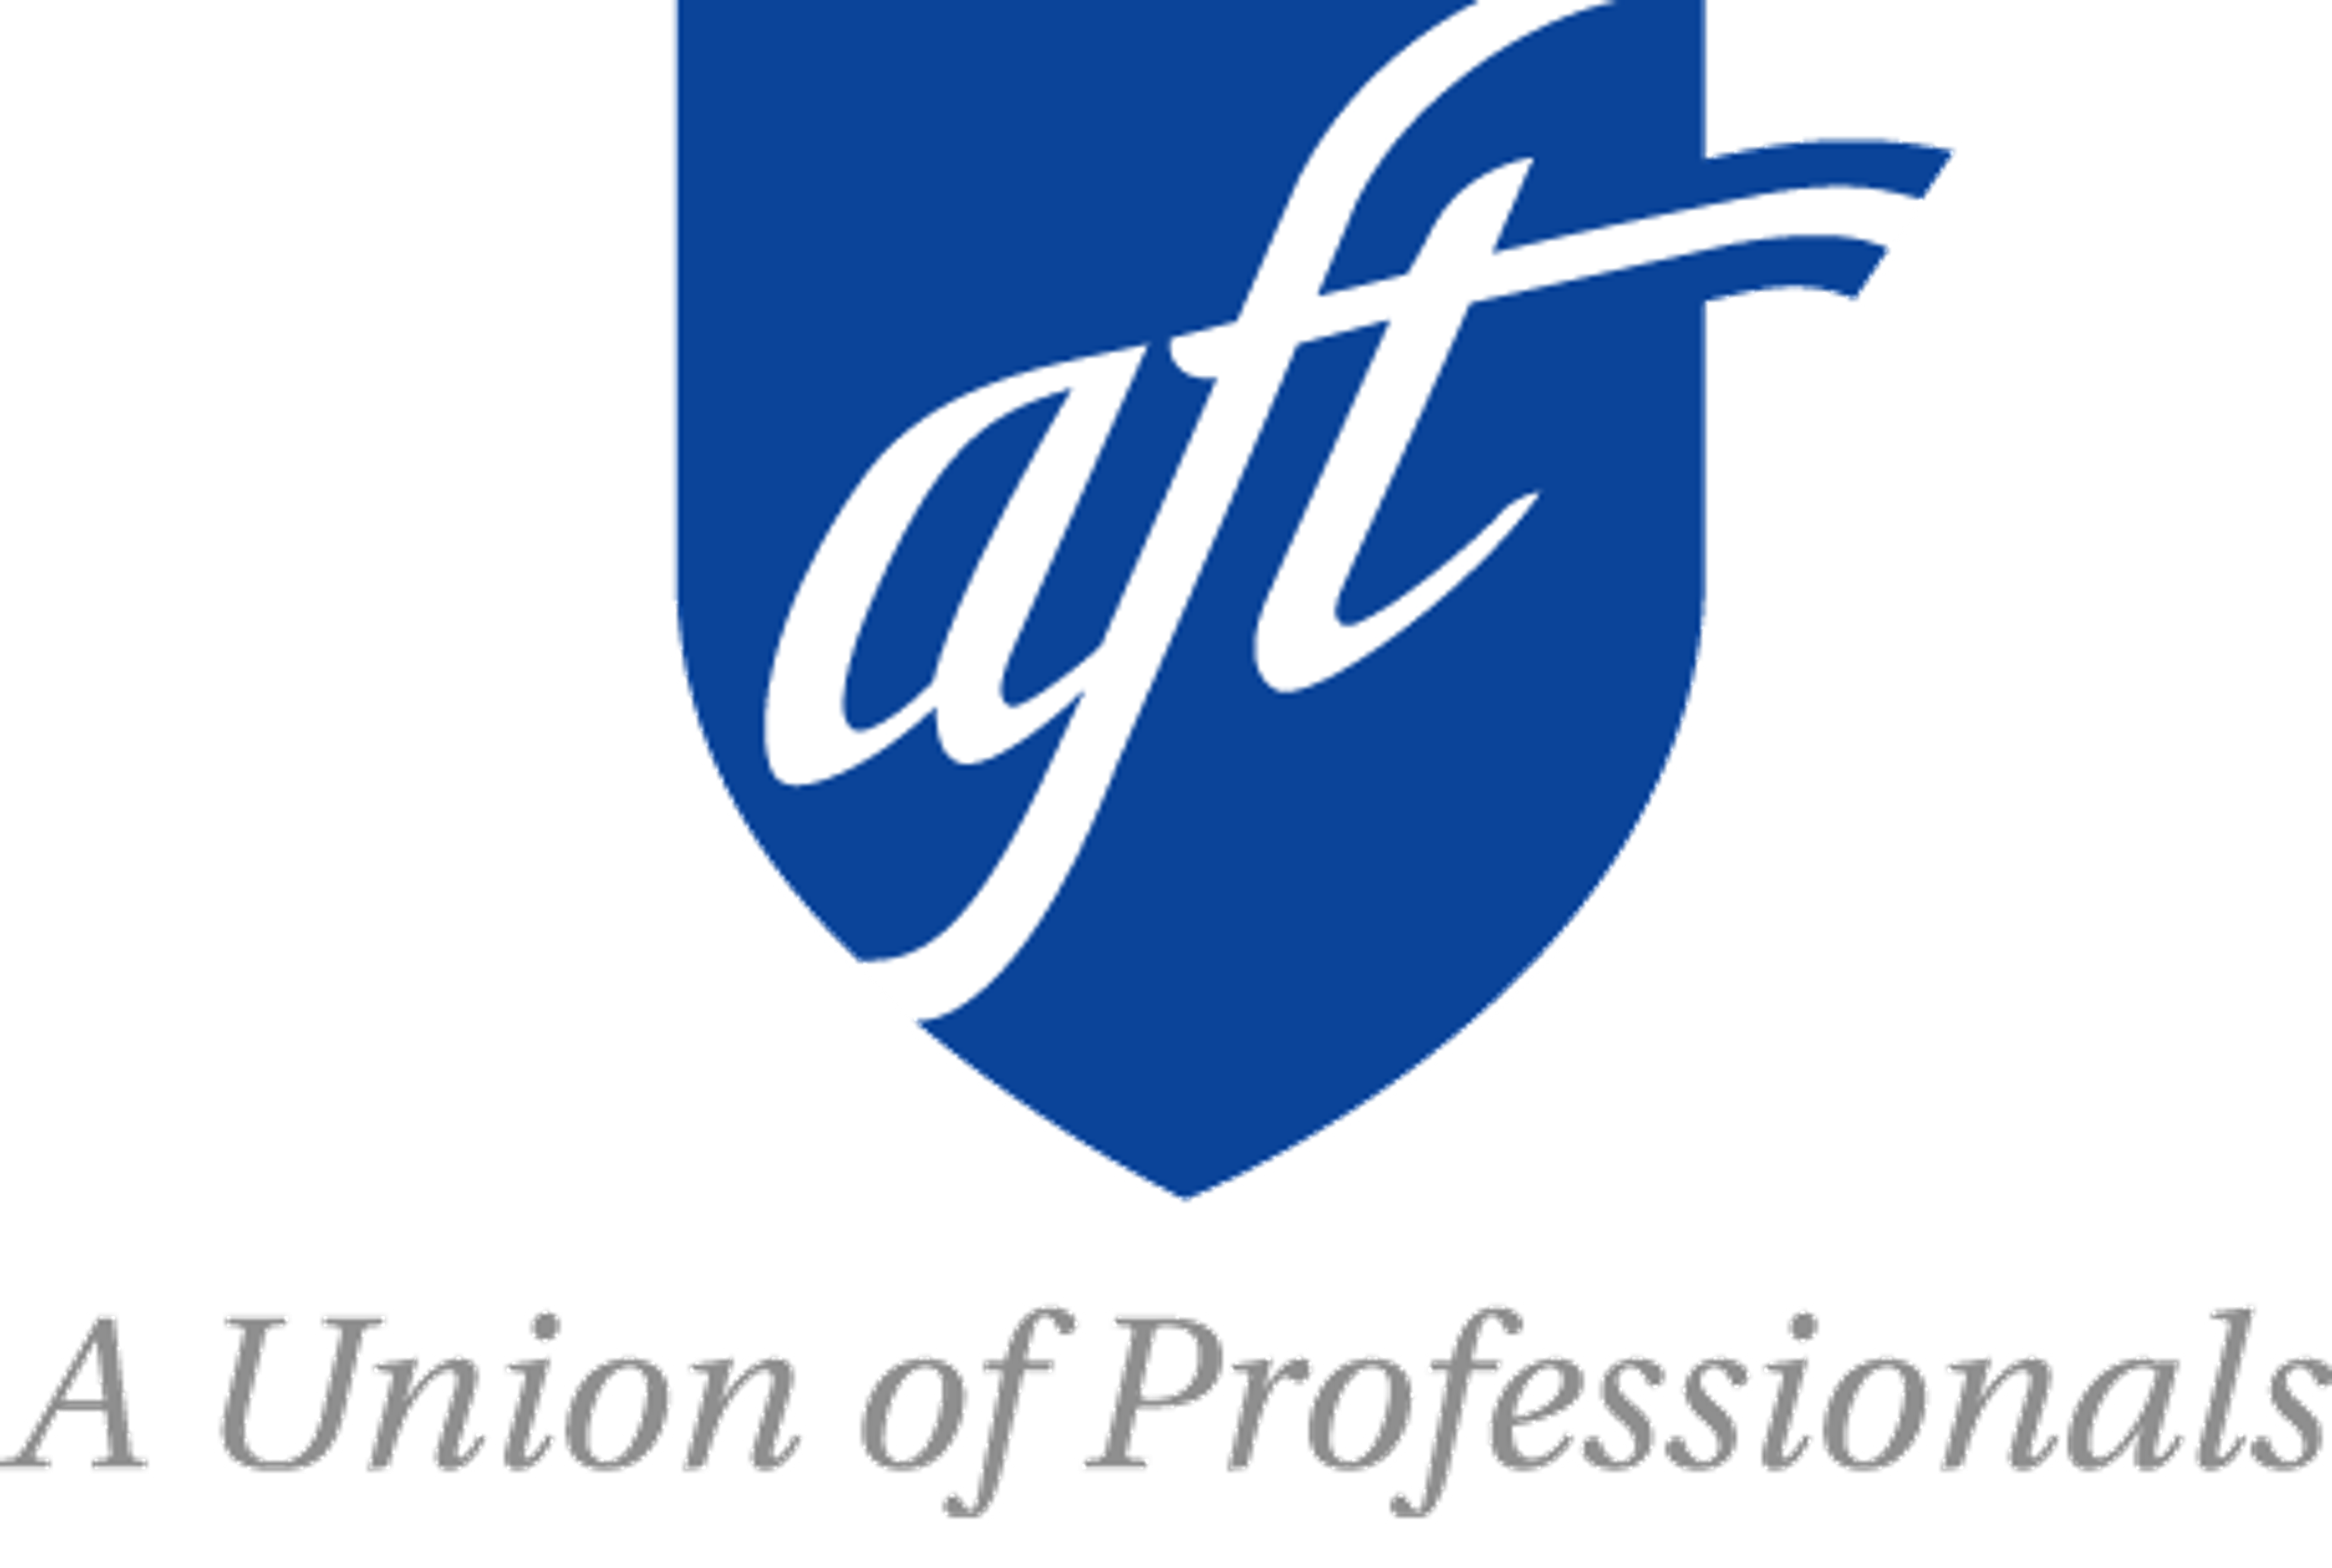 AFT logo with the tag "A Union of Professionals"